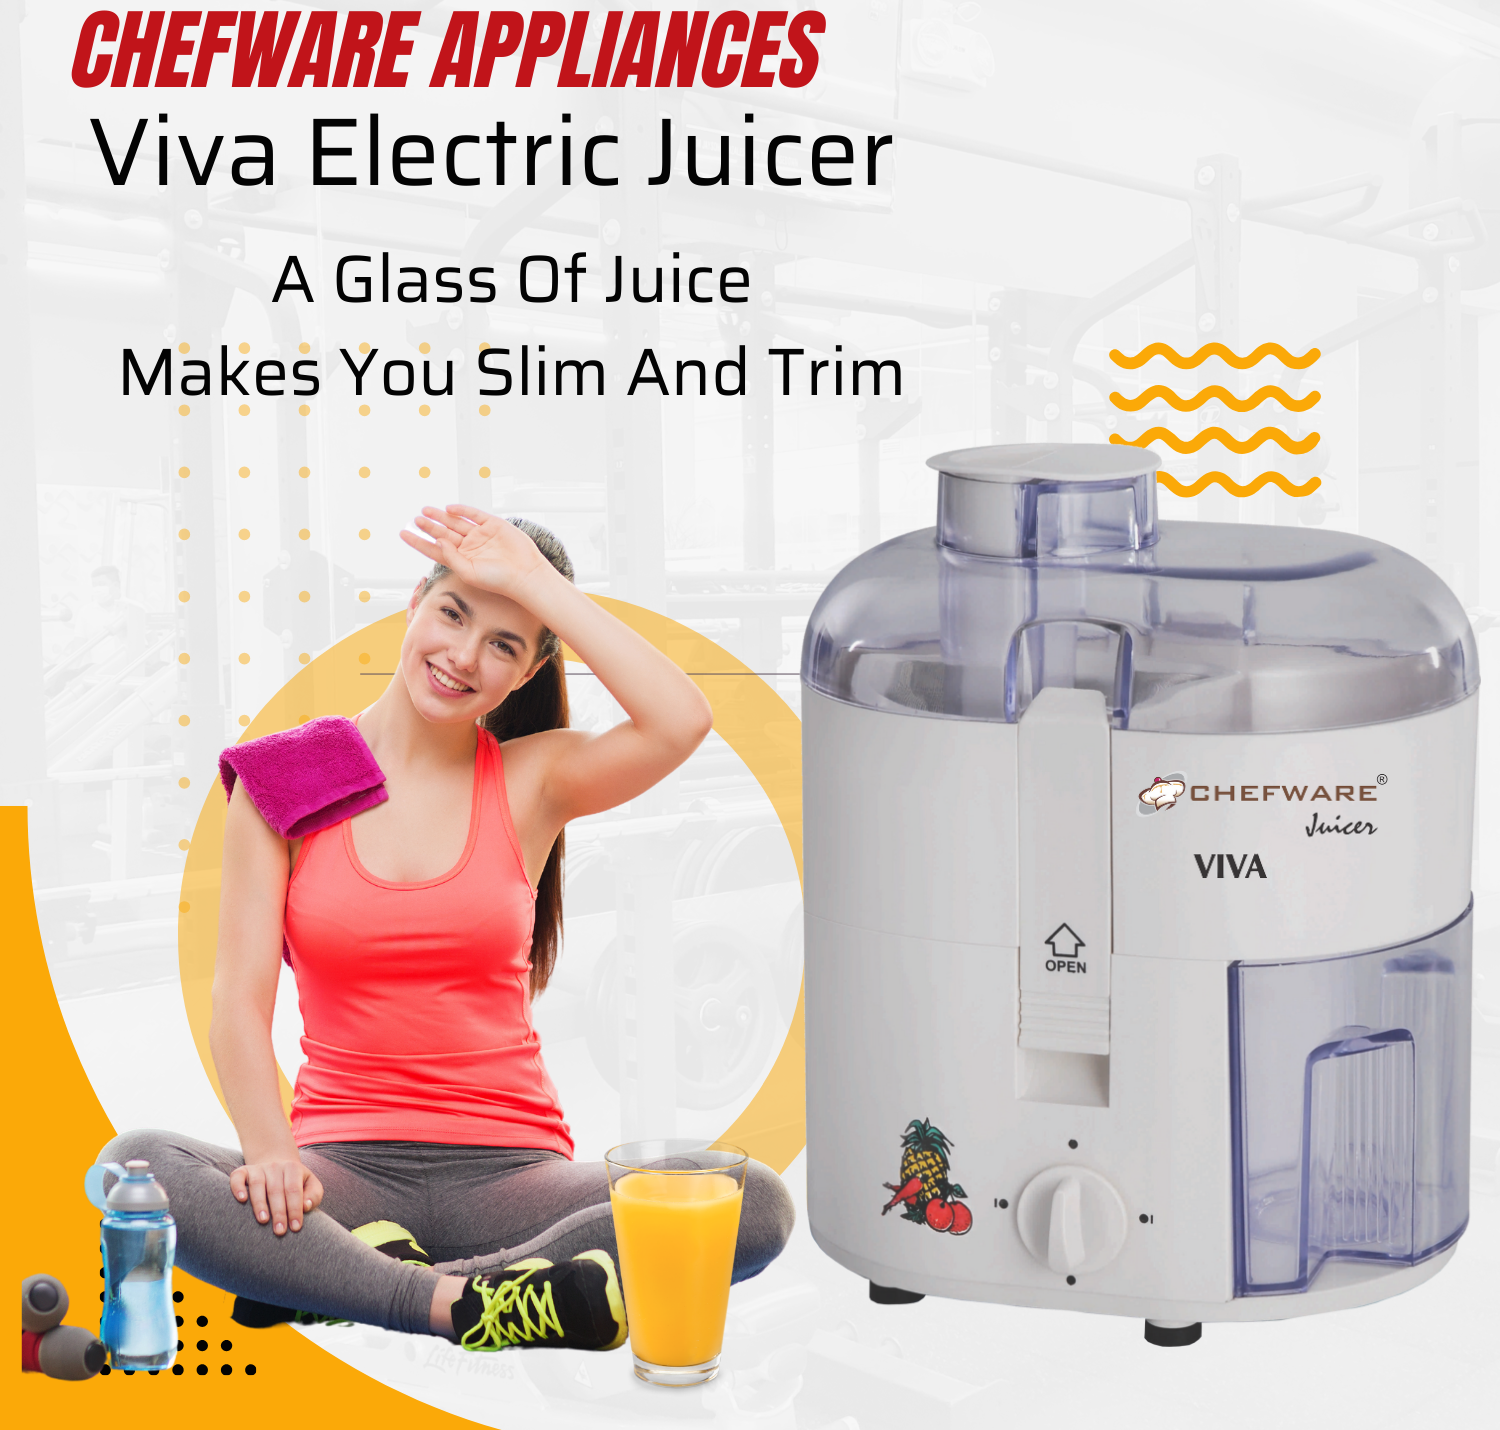 Chefware Appliances Viva Electric Juicer, 100% Pure Copper Motor